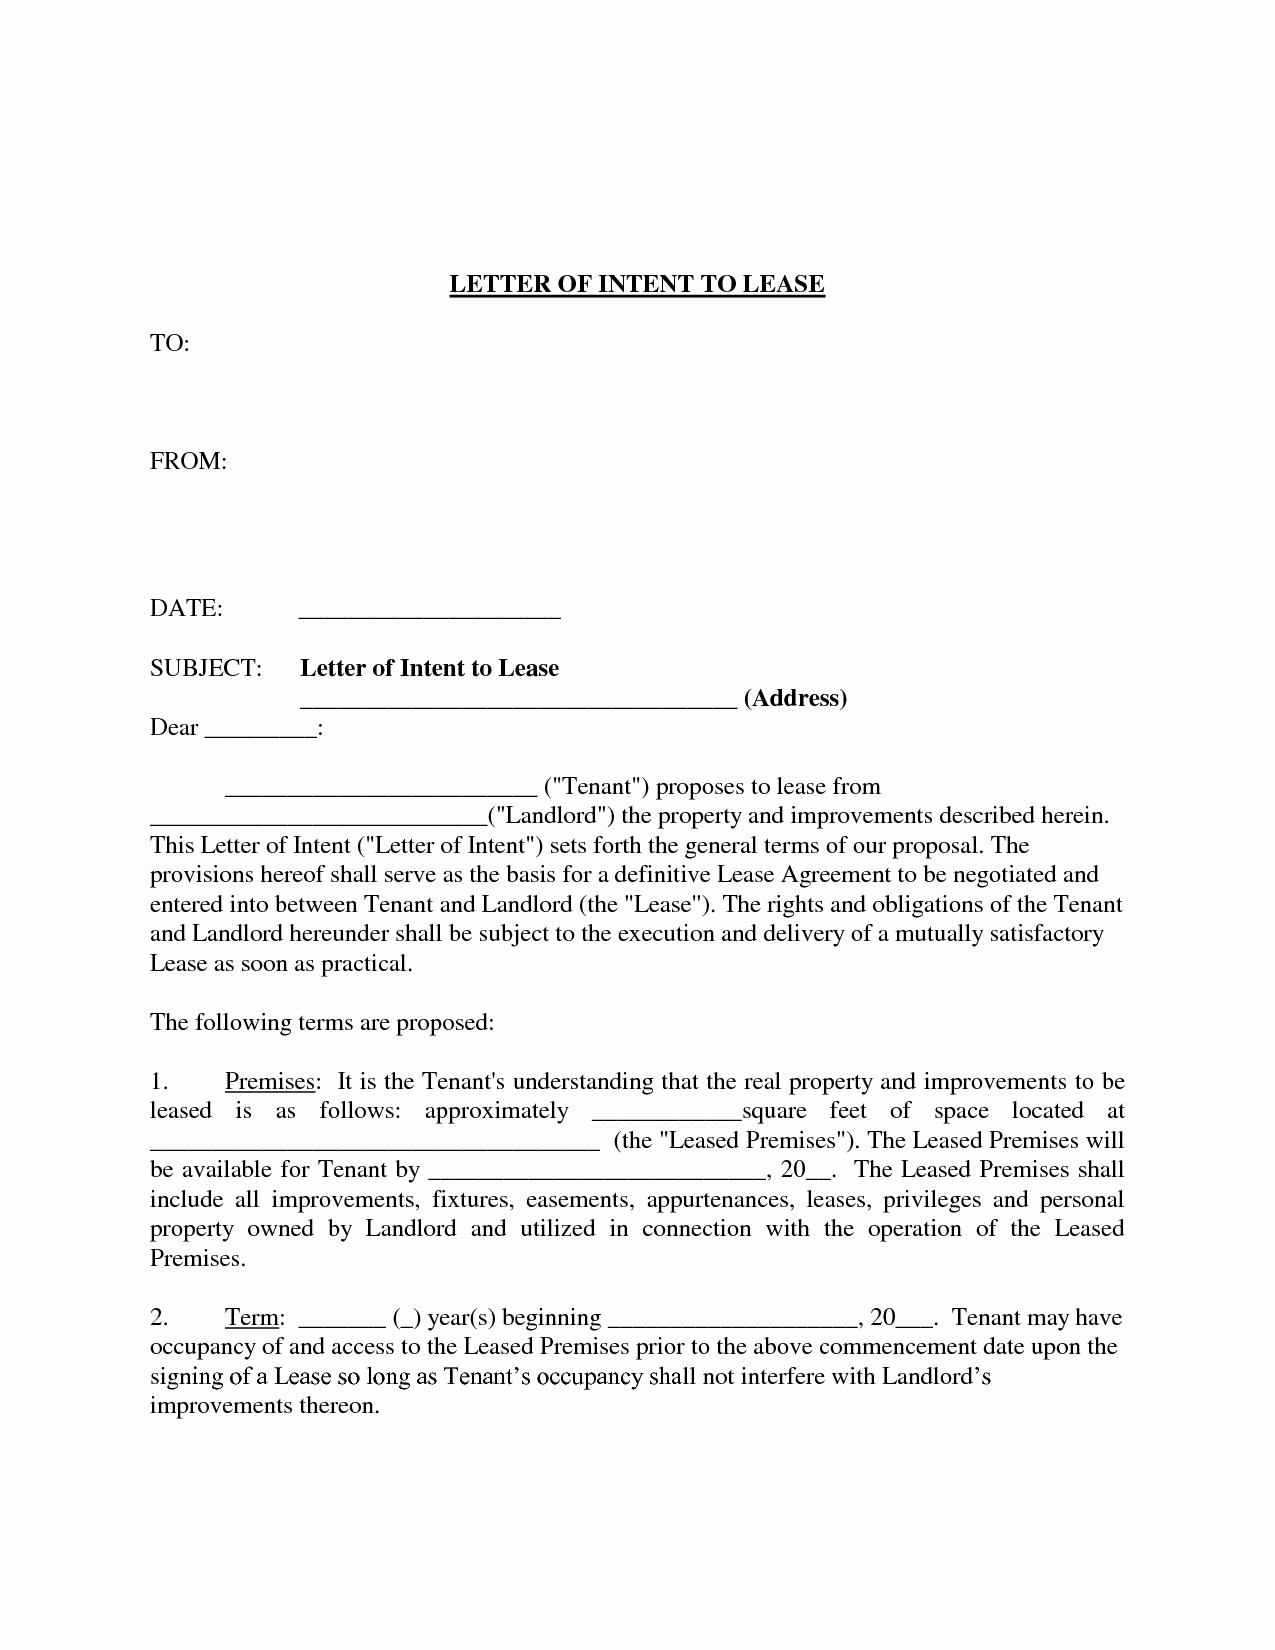 Commercial Real Estate Loi Template Fresh Mercial Lease Letter Intent Template Collection